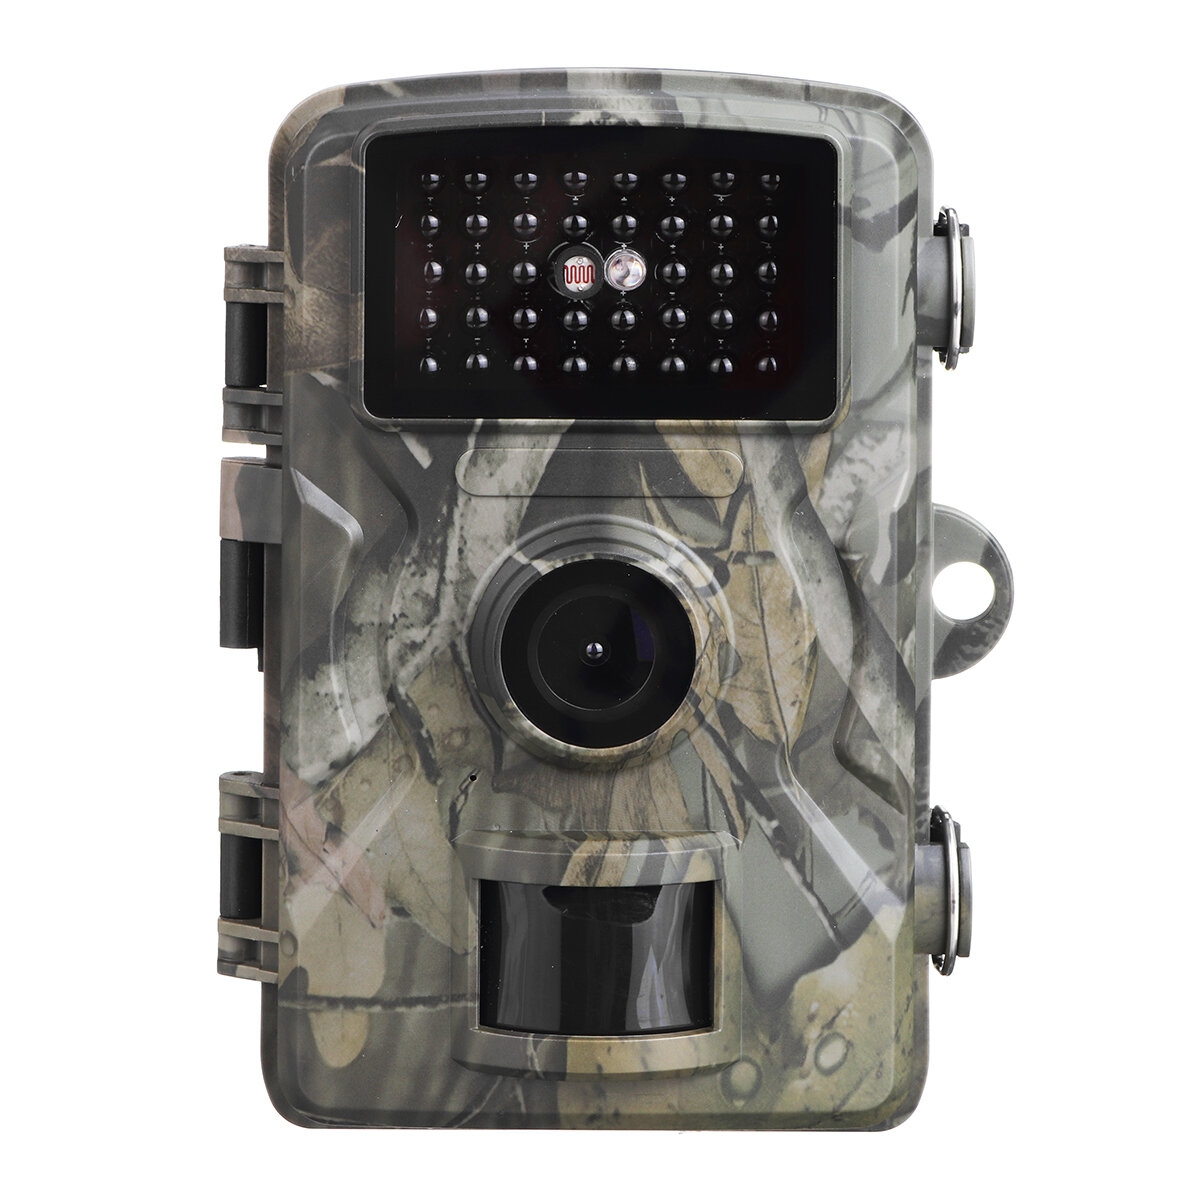 Dl001 16mp 1080p hd 2 inch screen hunting camera ir night vision waterproof scouting camera monitoring protecting farms safety